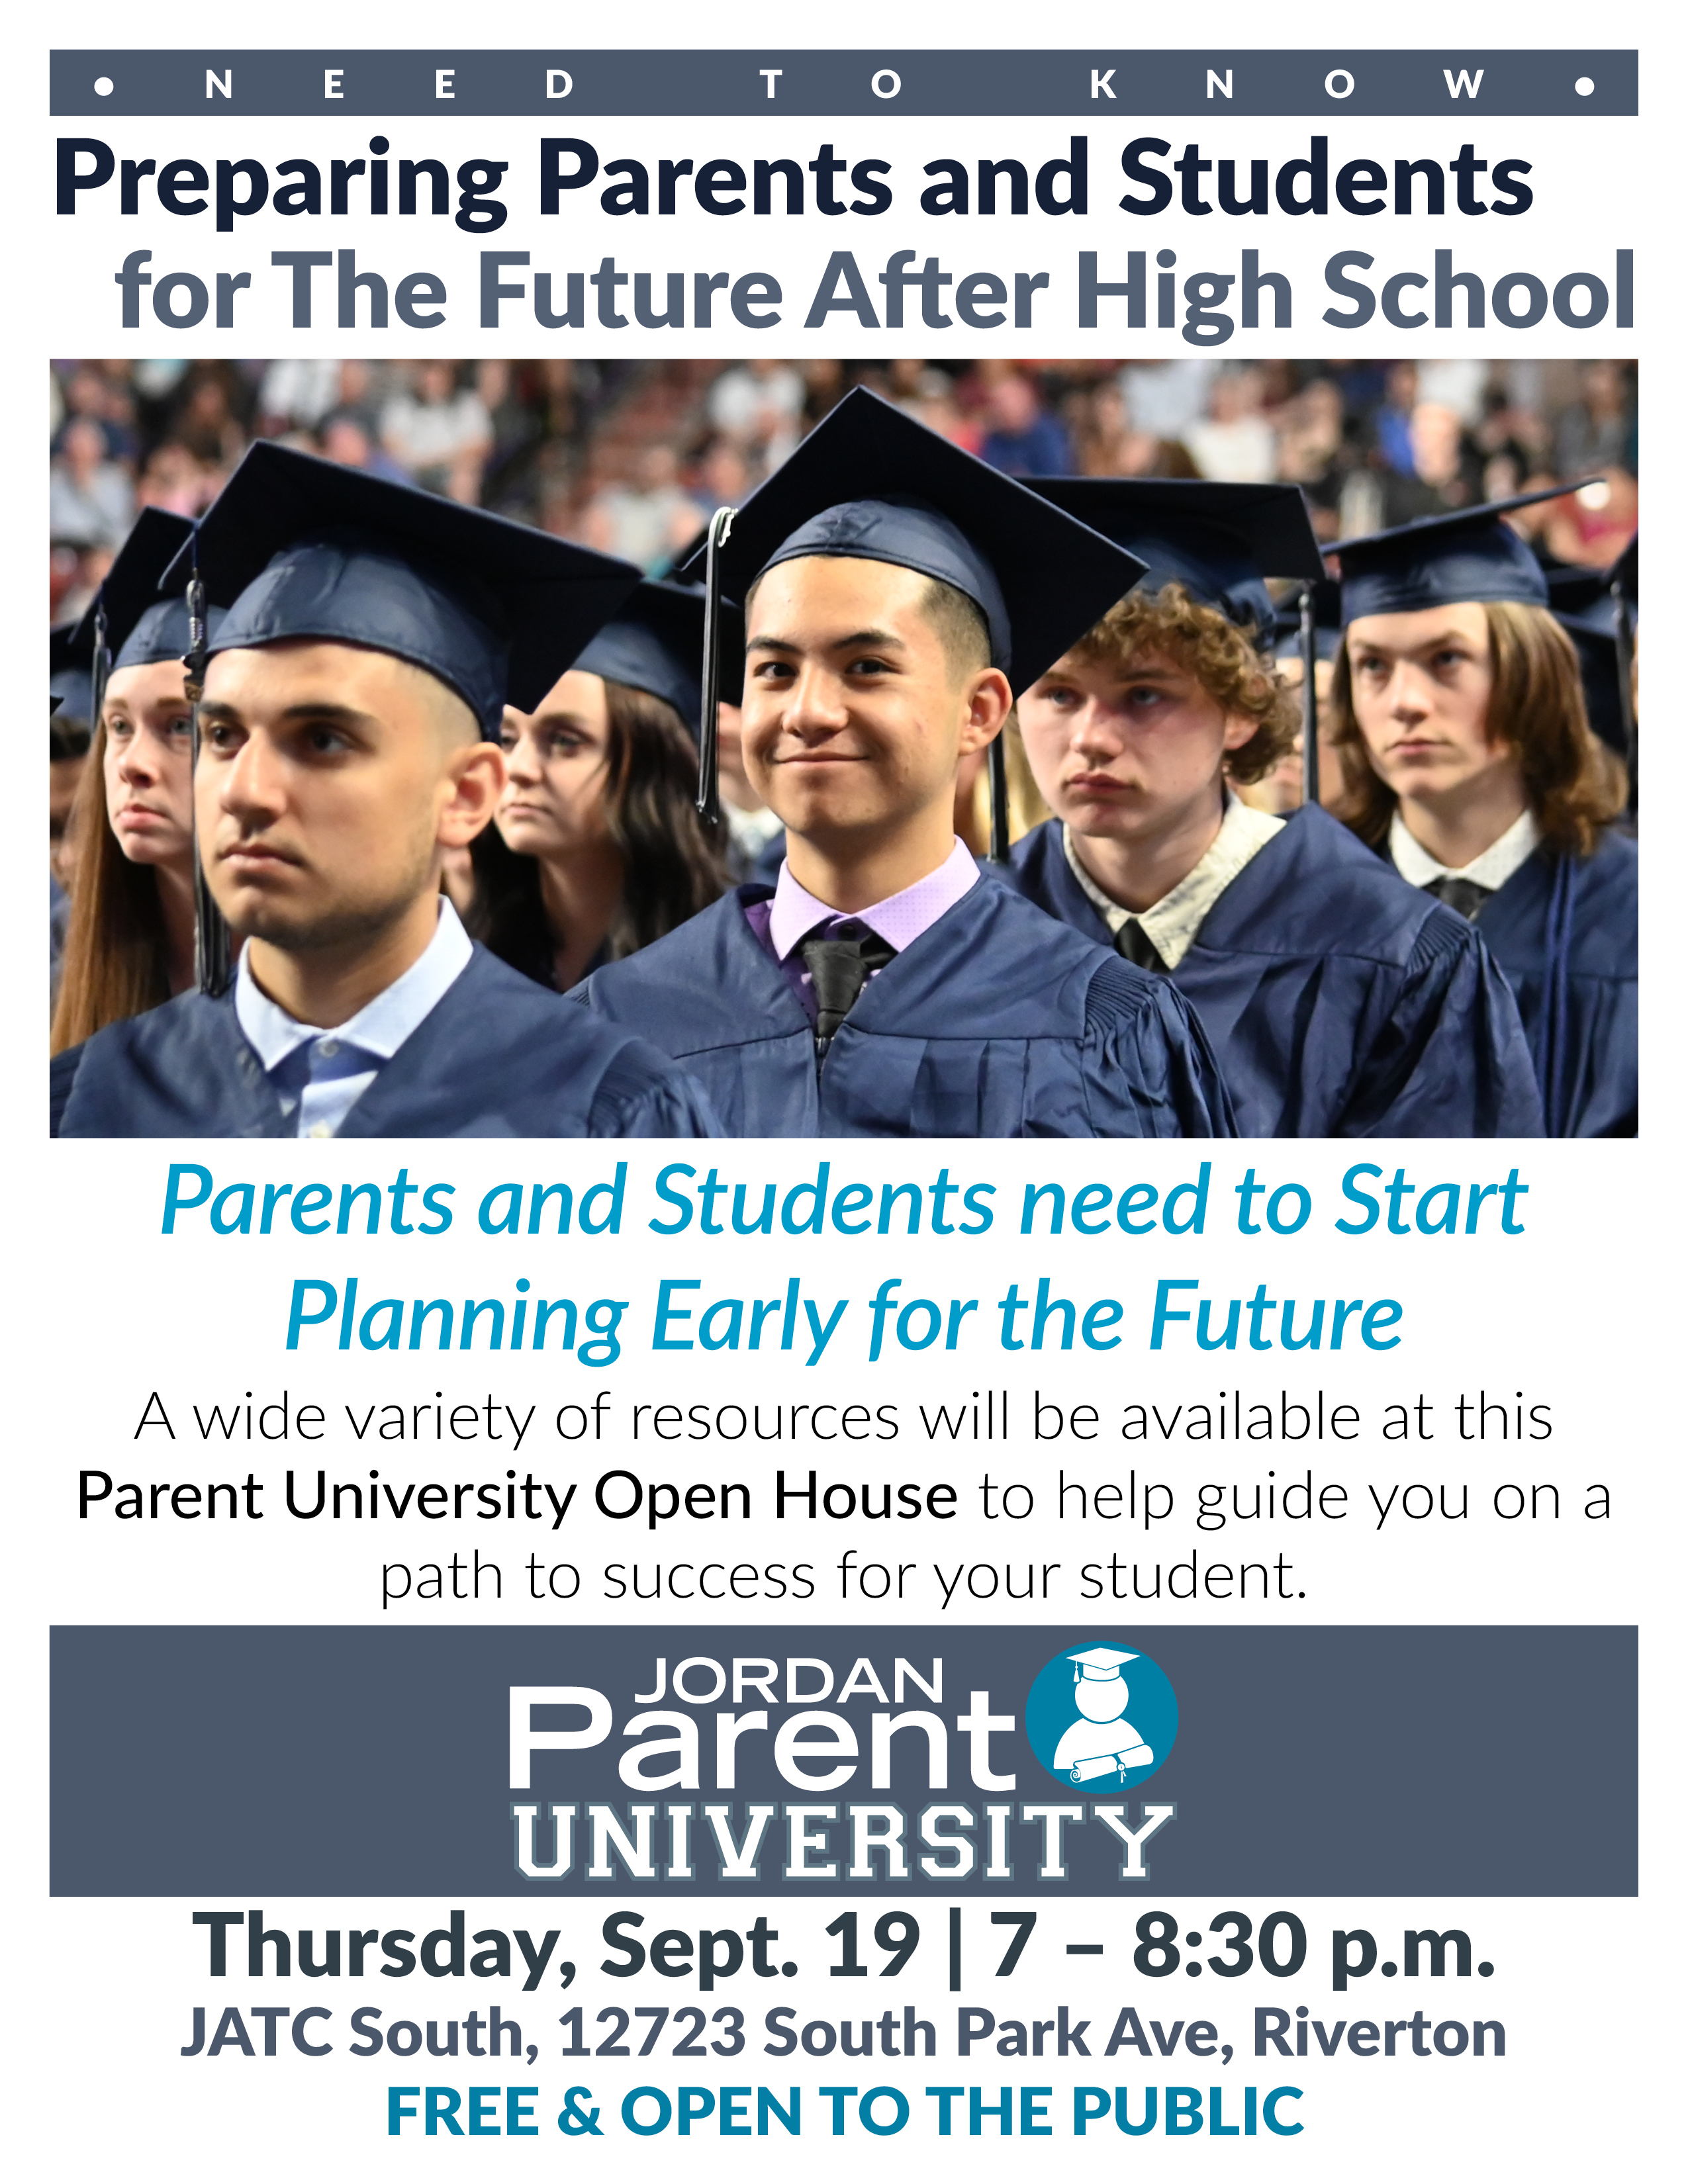 Need to Know - Preparing Parents and Students for the Future After High School